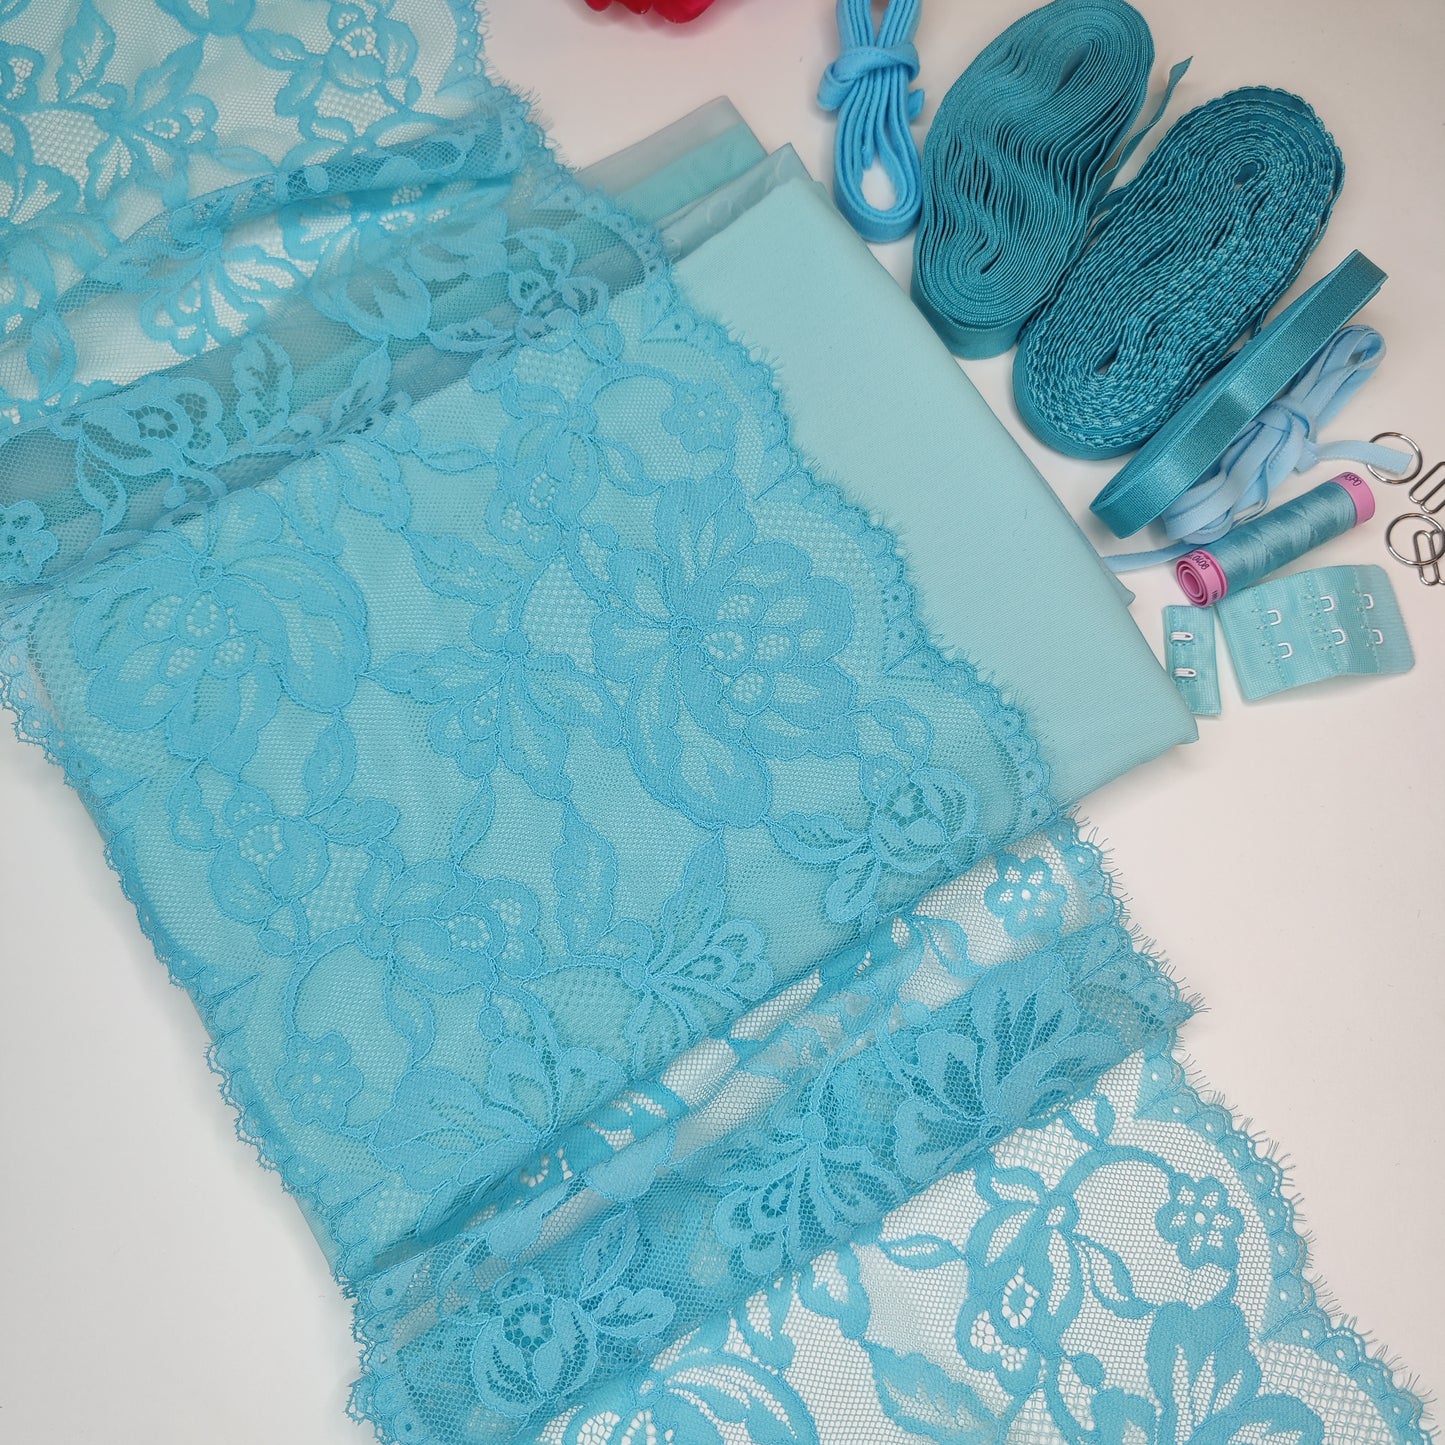 Large sewing set for 1 bra and 2 briefs or creative sewing package with <tc>lace</tc>, 2x microfiber and Powernet in turquoise. IDnsx1